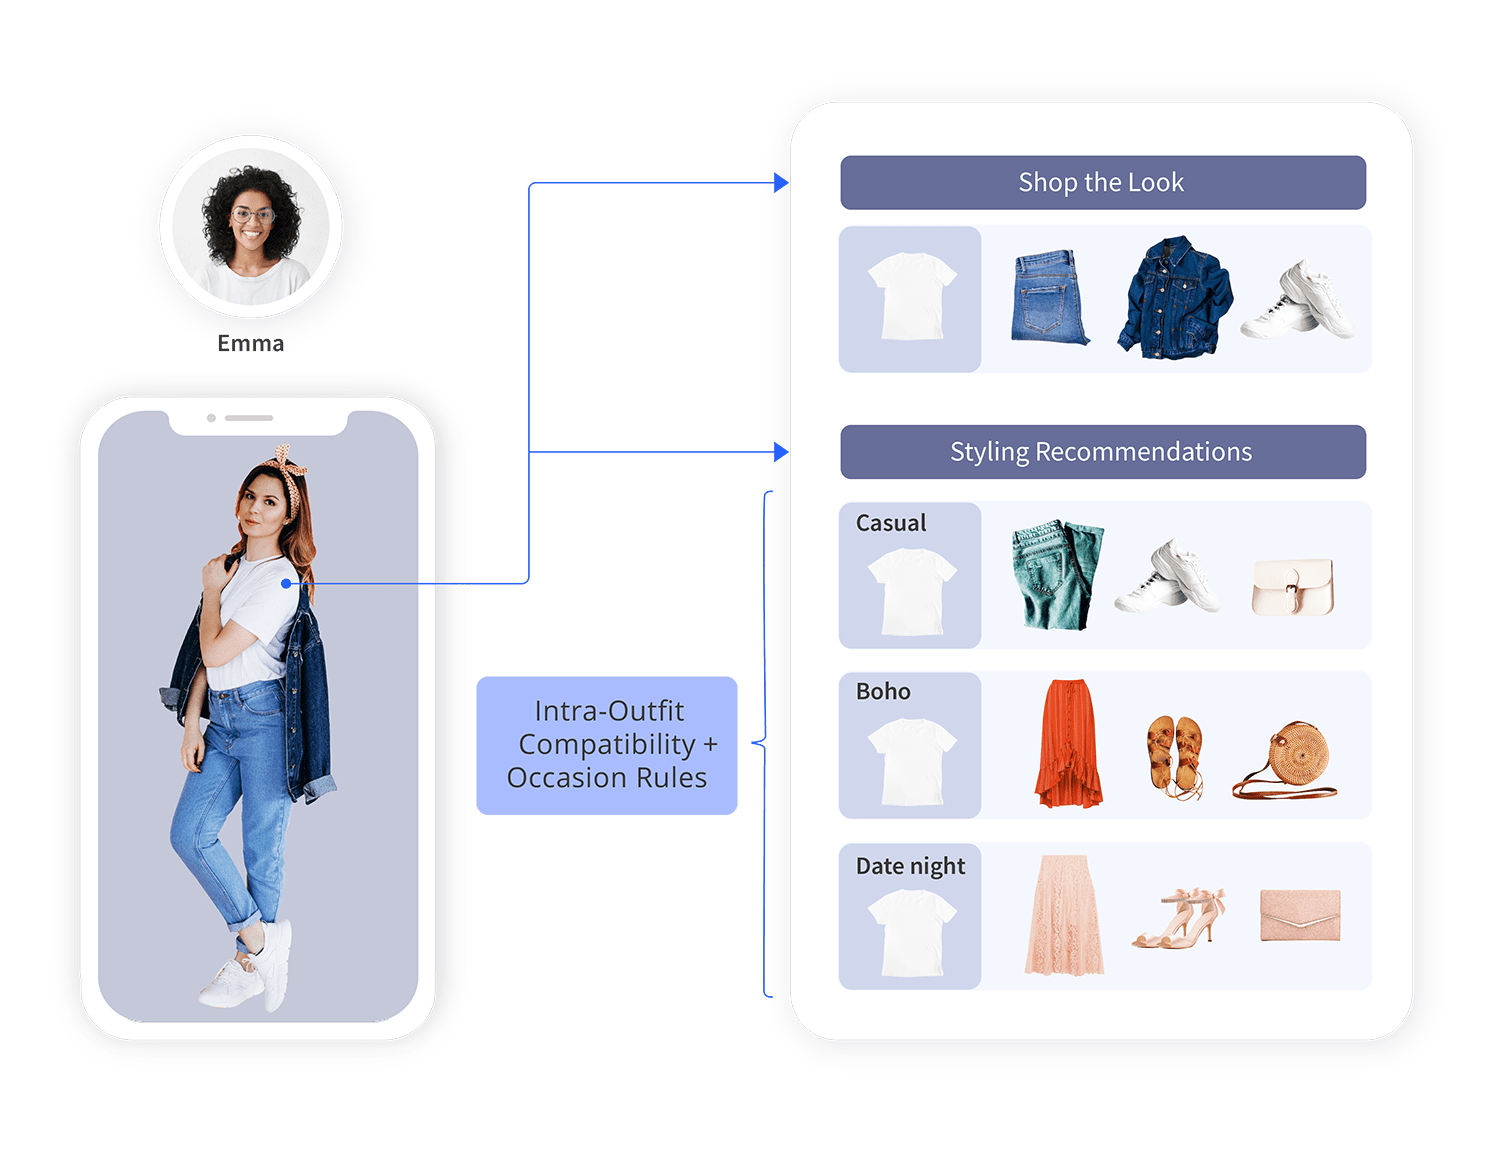 Sell outfits rather than a single product to your shoppers